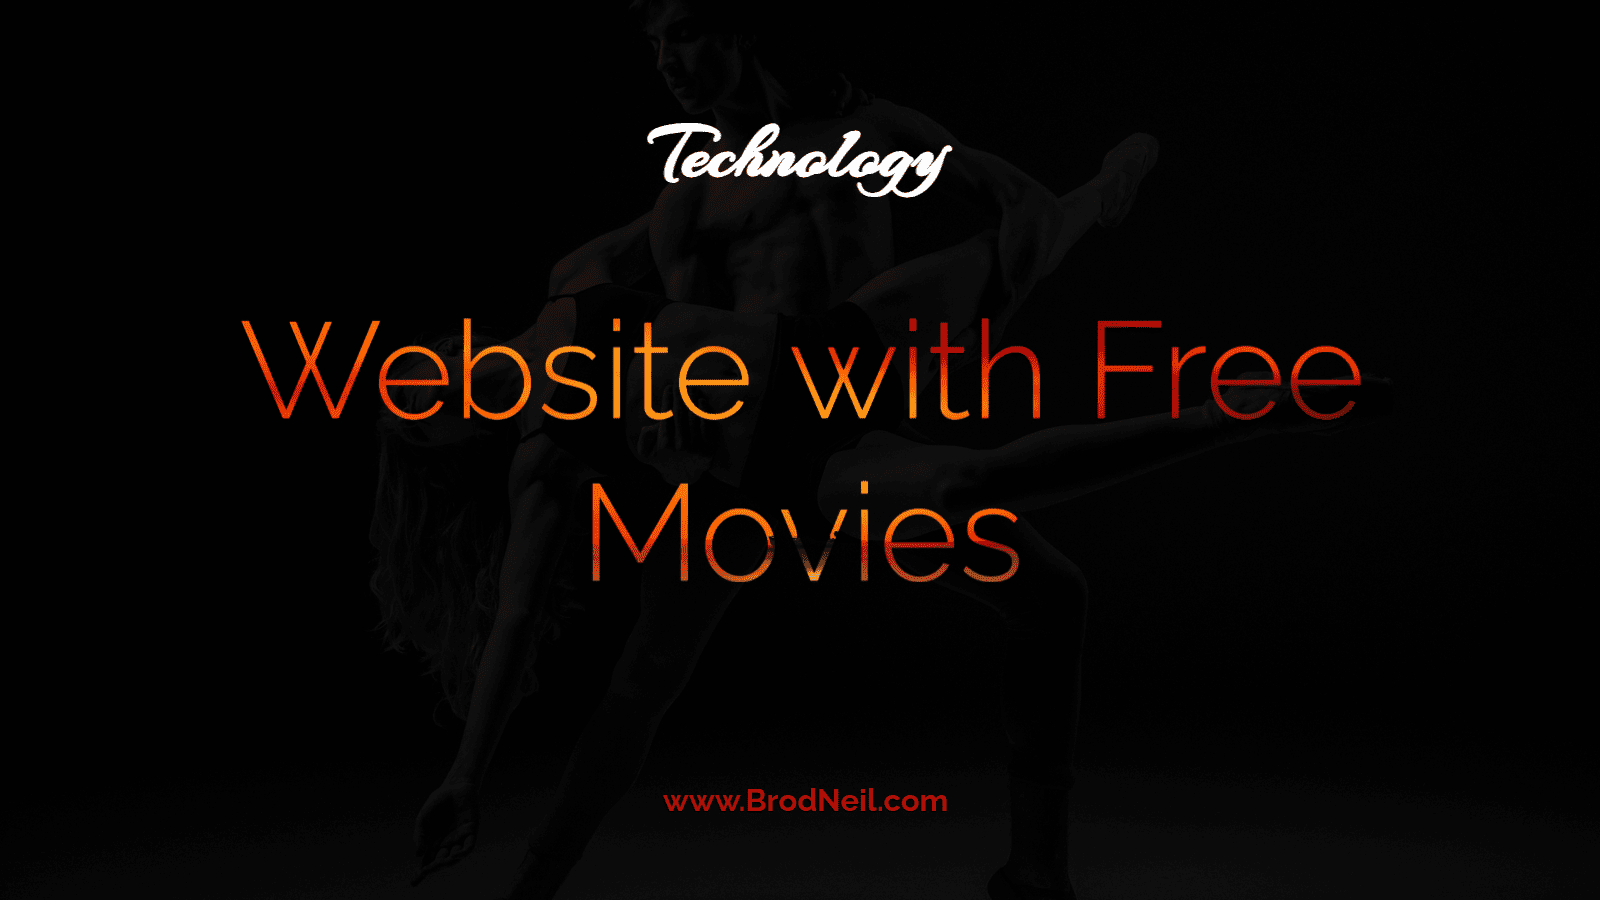 Websites with Free Movies